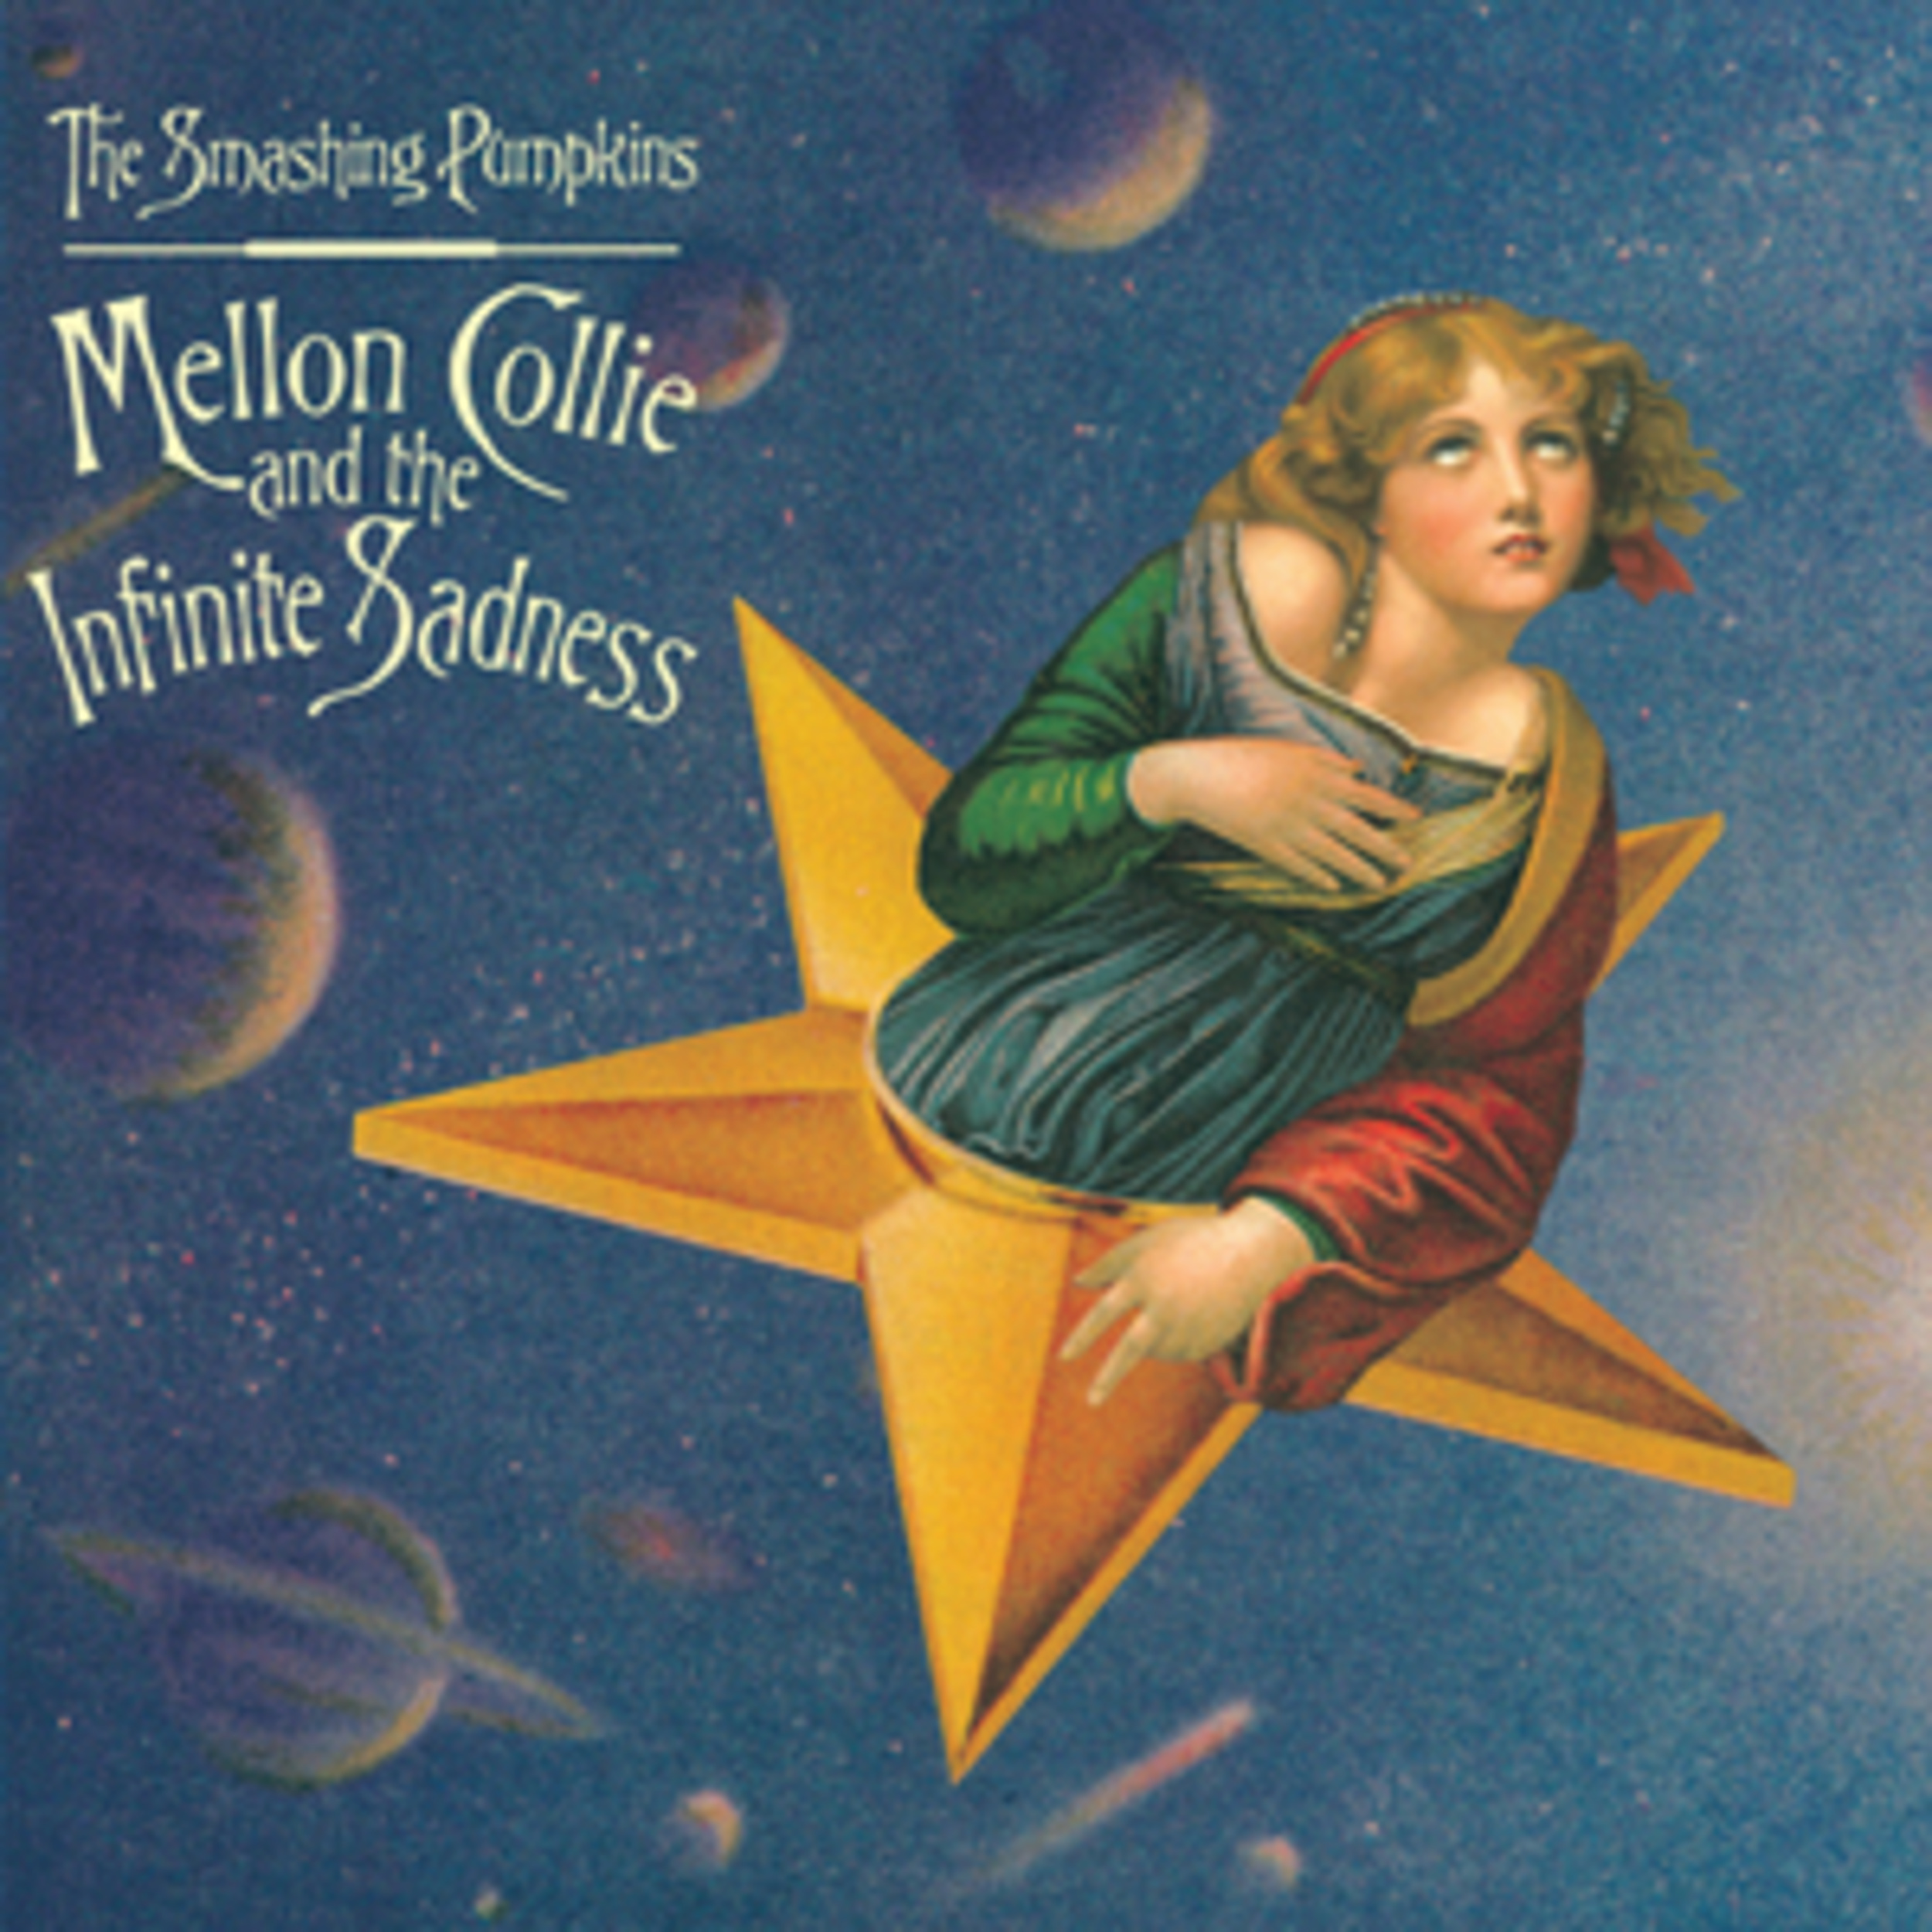 <p>One of the Pumpkins' most popular songs and the memorable lead single from <em>Mellon Collie and the Infinite Sadness</em>. It's a classic alternative rock track that's hard, filled with the Pumpkins' signature distortion, and known for Bill Corgan's drawling "The world is a vampire" intro. During the early-to-mid-1990s, Gen-Xers crowded dance floors in college bars, unleashing their excitement while shouting, "<a href="https://www.youtube.com/watch?v=8-r-V0uK4u0">despite all my rage, I am still just a rat in a cage</a>." The song won a Grammy for Best Hard Rock Performance.</p>